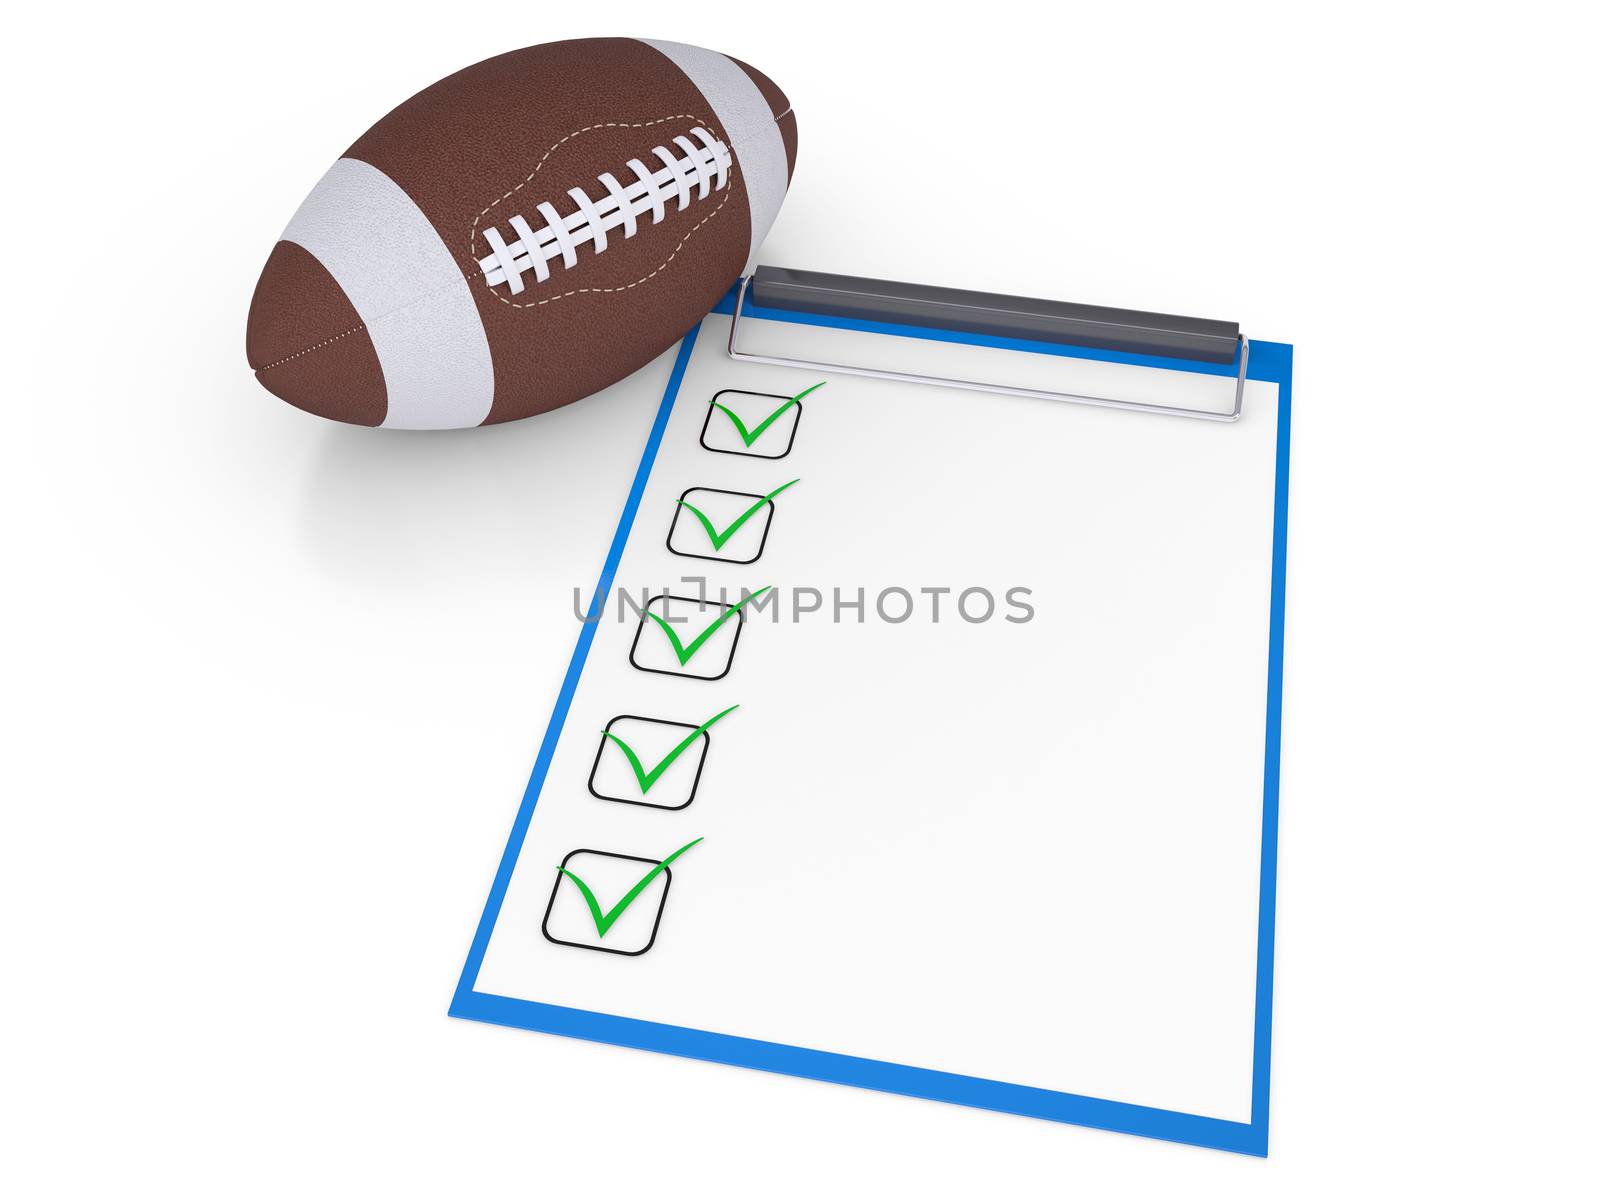 Checklist and football ball. Isolated render on a white background